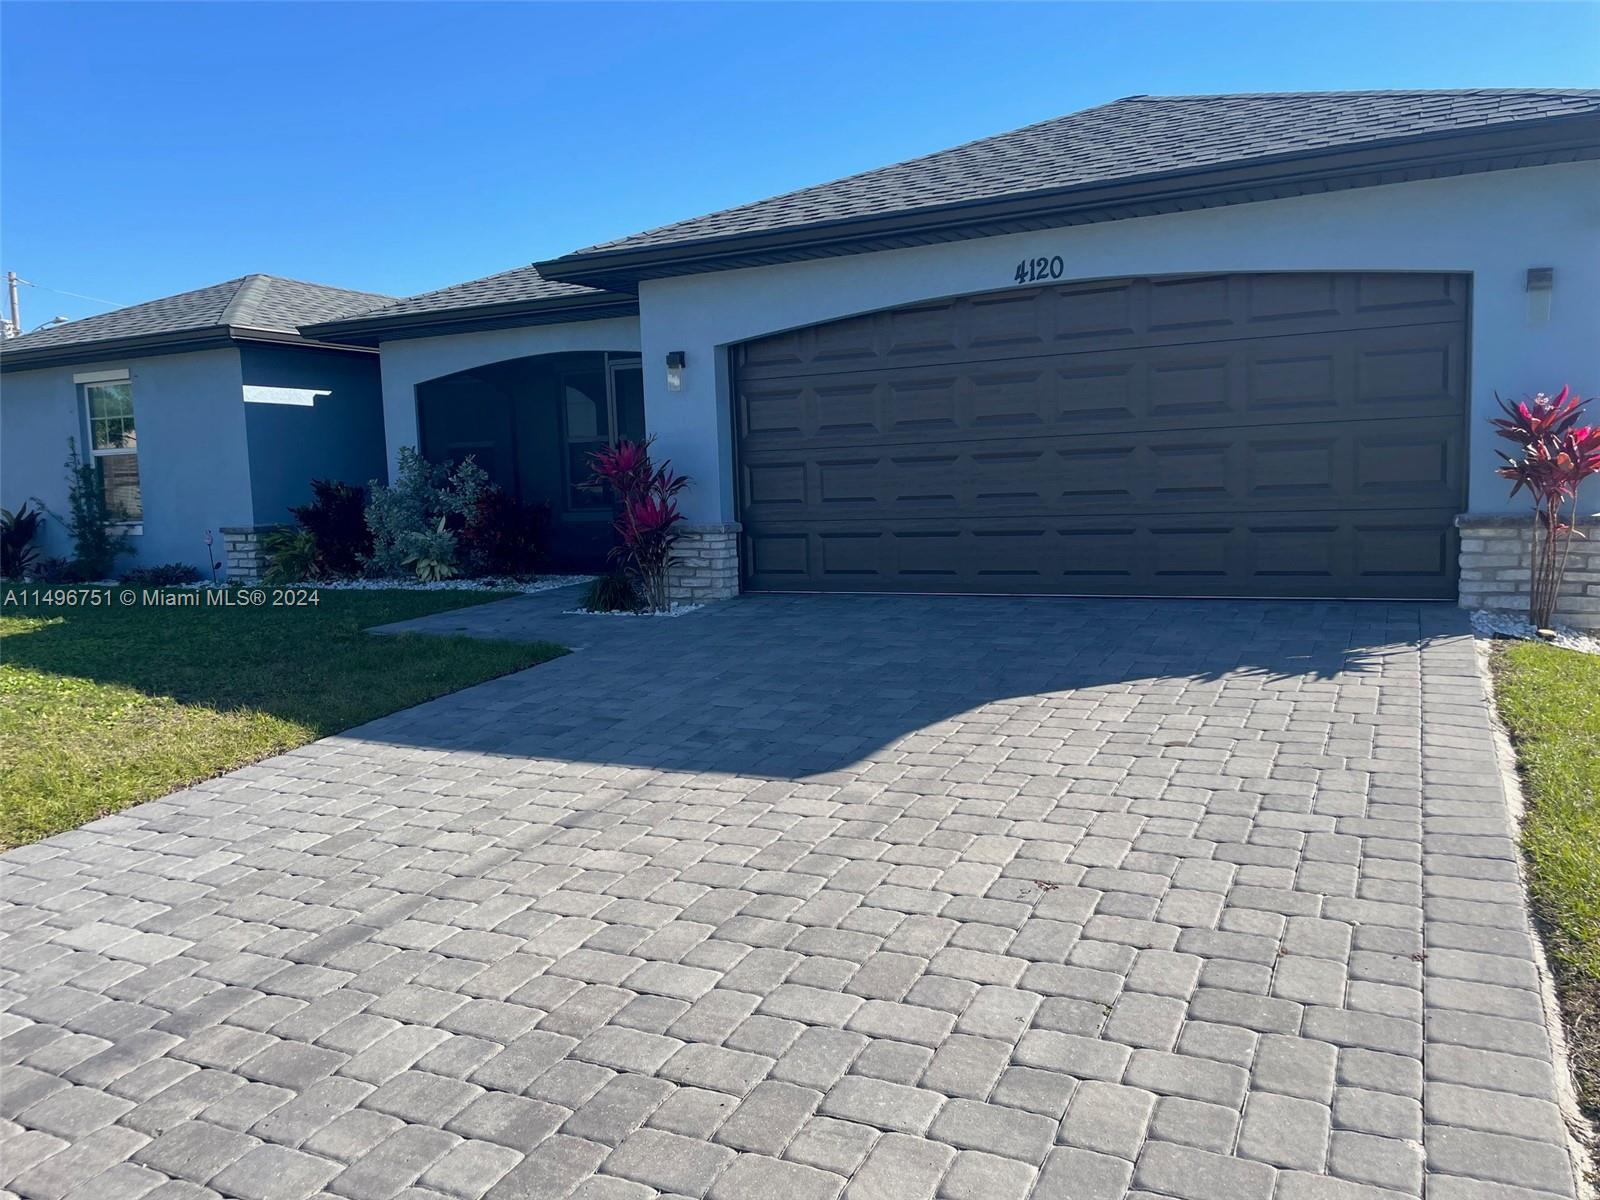 Photo of 4120 NW 33 St in Cape Coral, FL